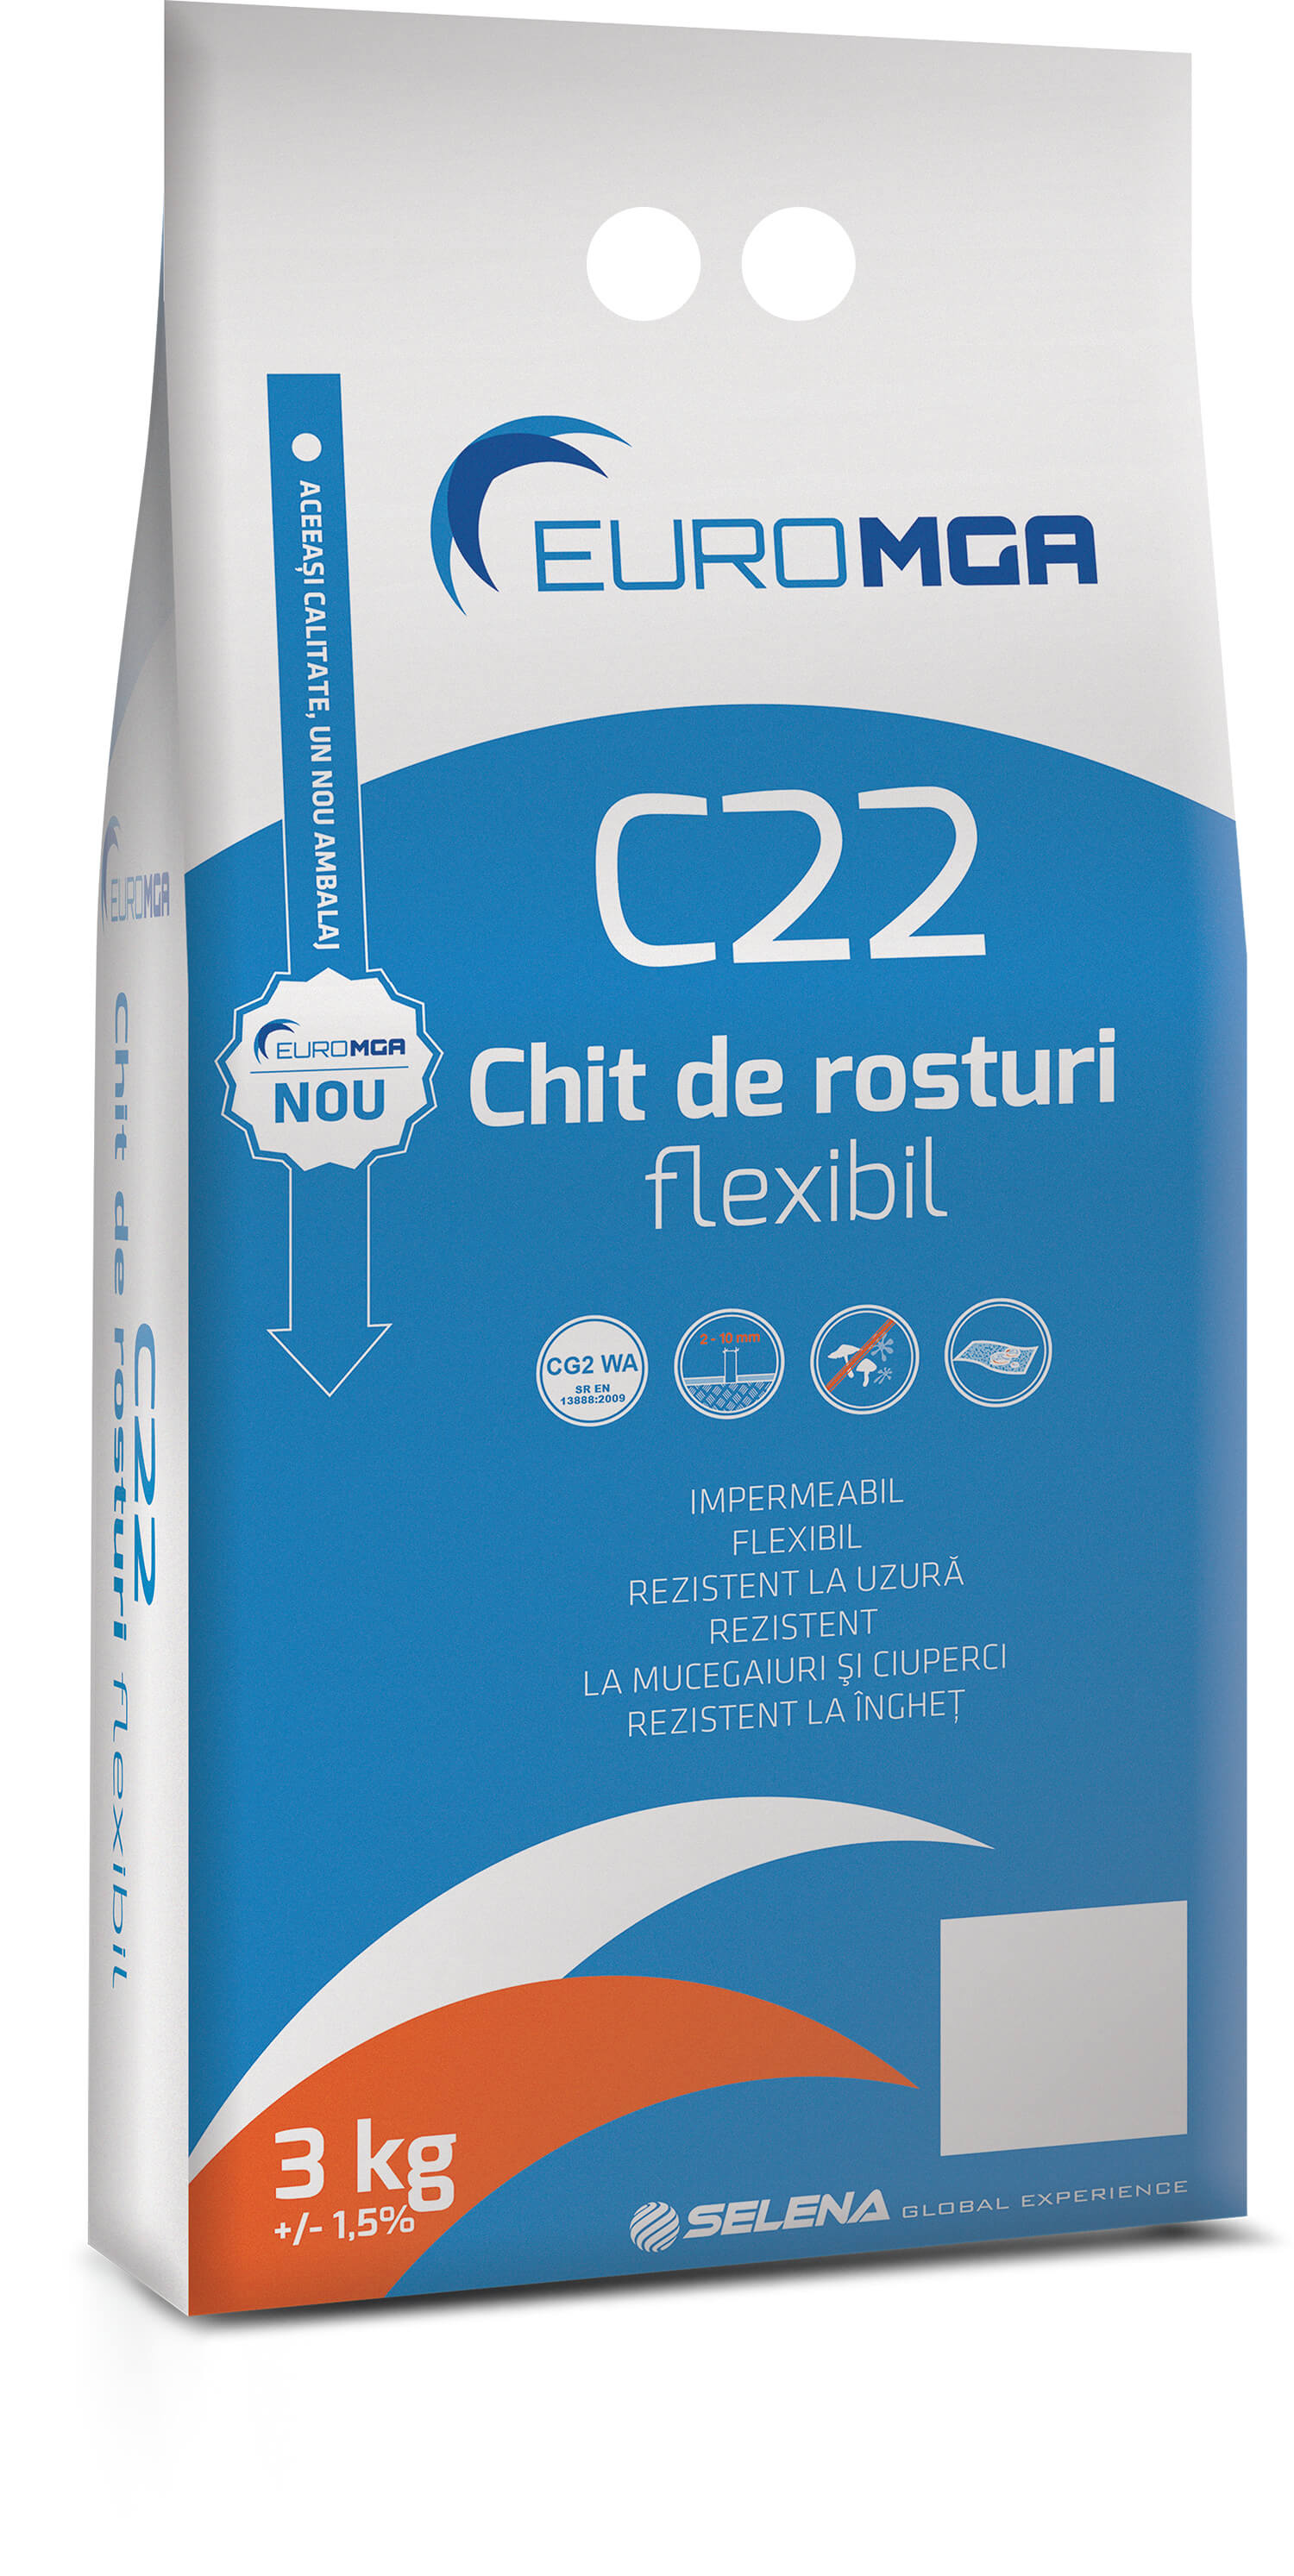 Joints - Flexible Gray C22 EuroMGA 3kg grout, maxbau.ro